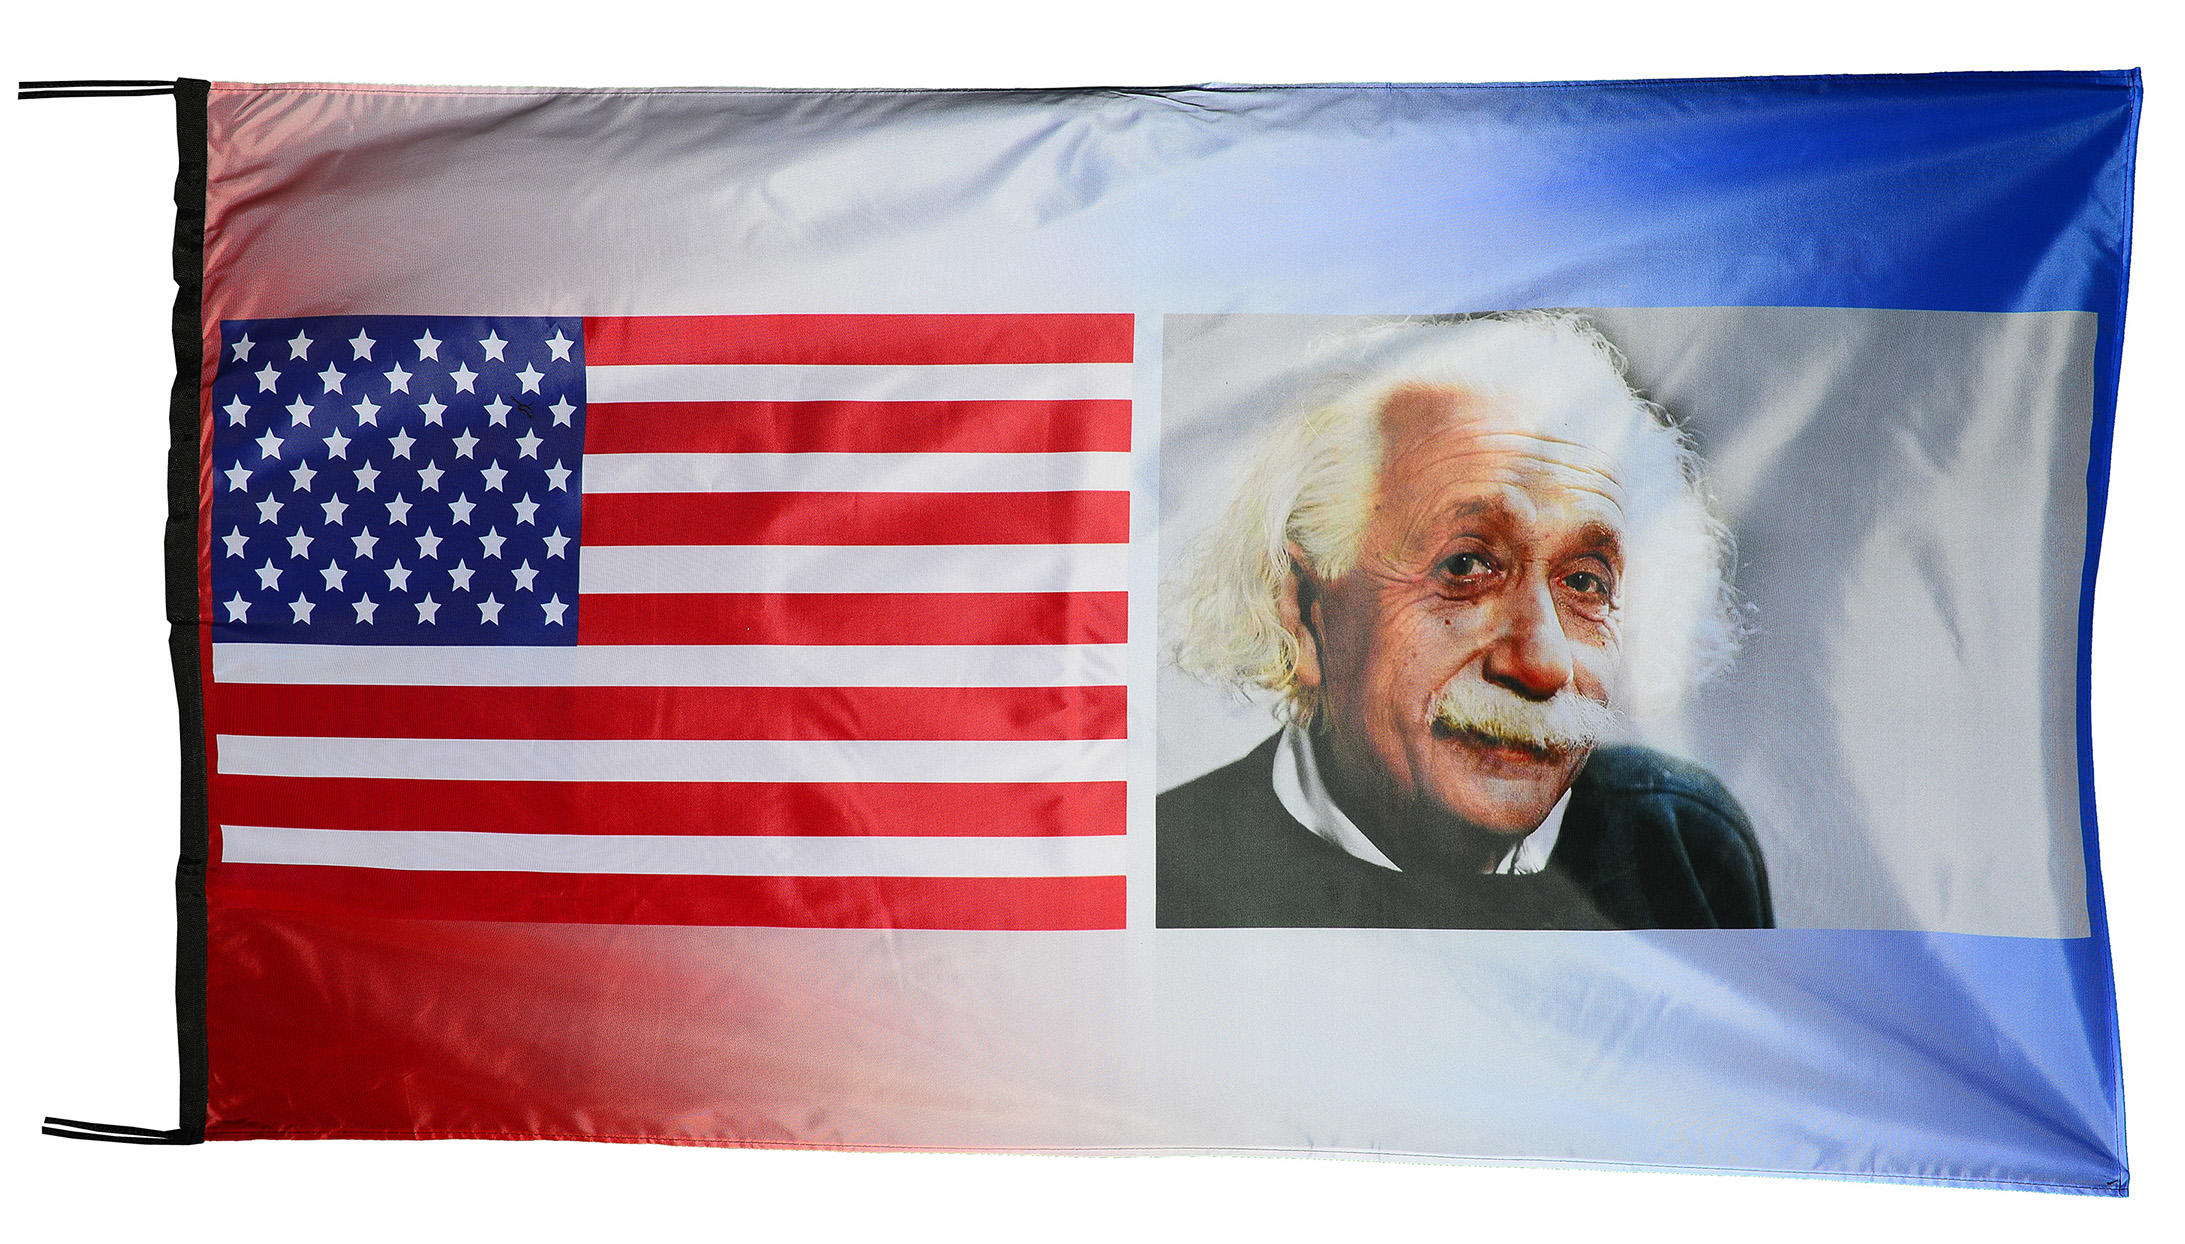 Flag  051 USA / US Country / United States Of America and Belgium / American / Patriotic / Pride Hybrid Weather-Resistant Polyester Outdoor Flag Landscape Banner / Vivid Colors / 3 X 5 FT (150 x 90cm) International Flags for Sale